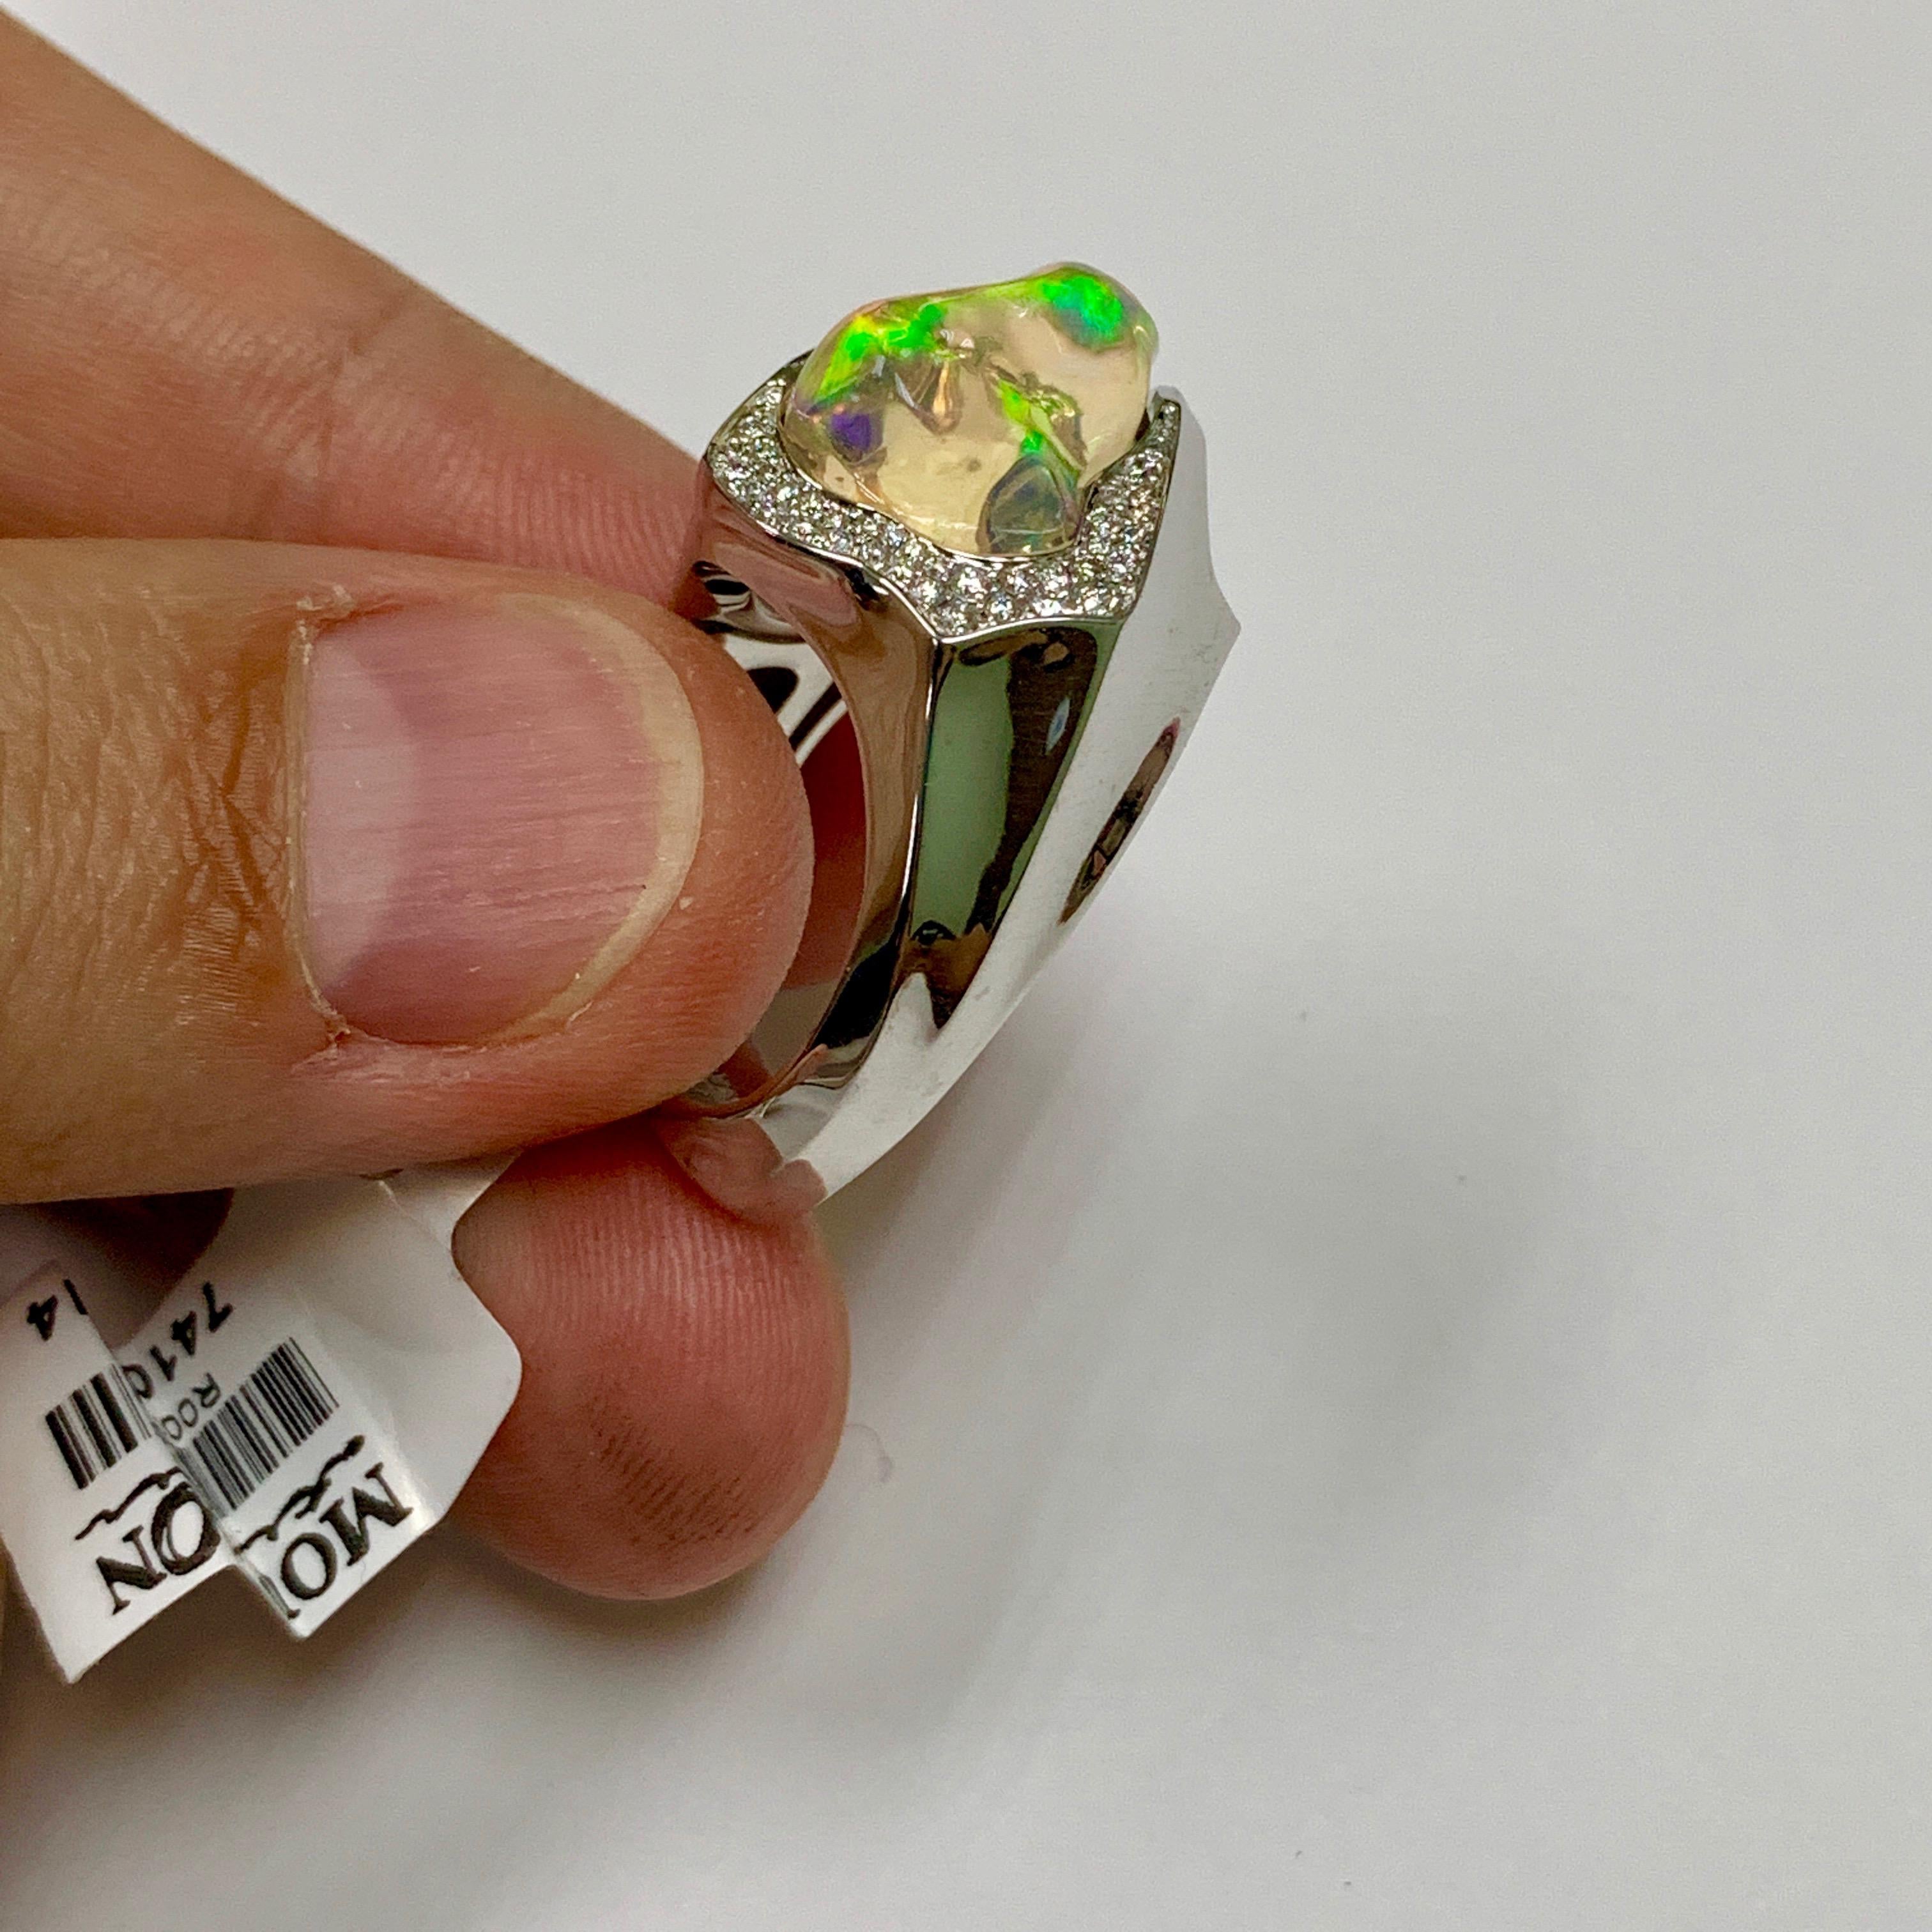 Sugarloaf Cabochon Mexican Opal 7.82 Carat Diamonds One of a Kind 18 Karat White Gold Ring For Sale